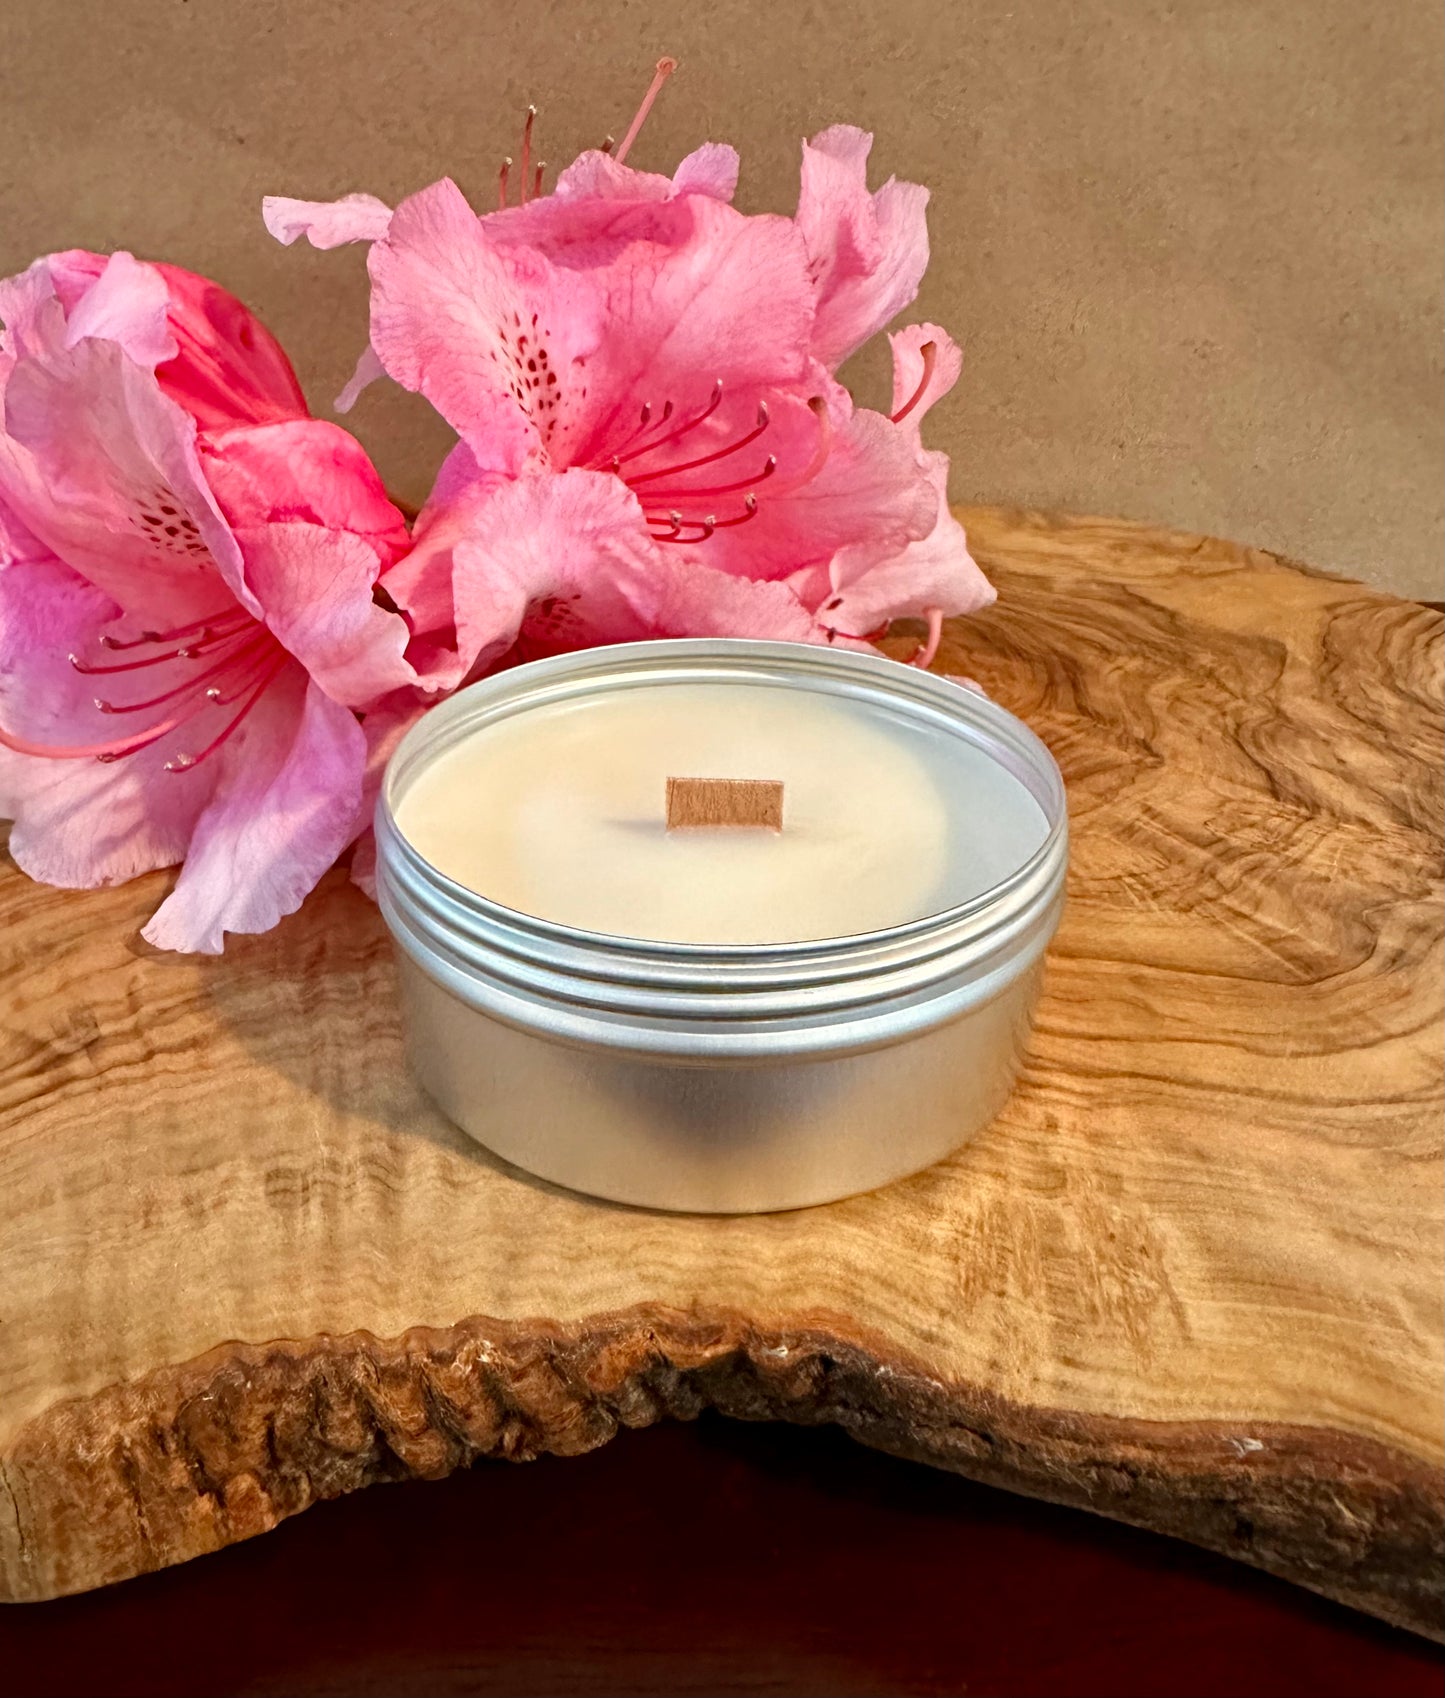 Skagit Wild Coconut and Lime 4oz. Candle